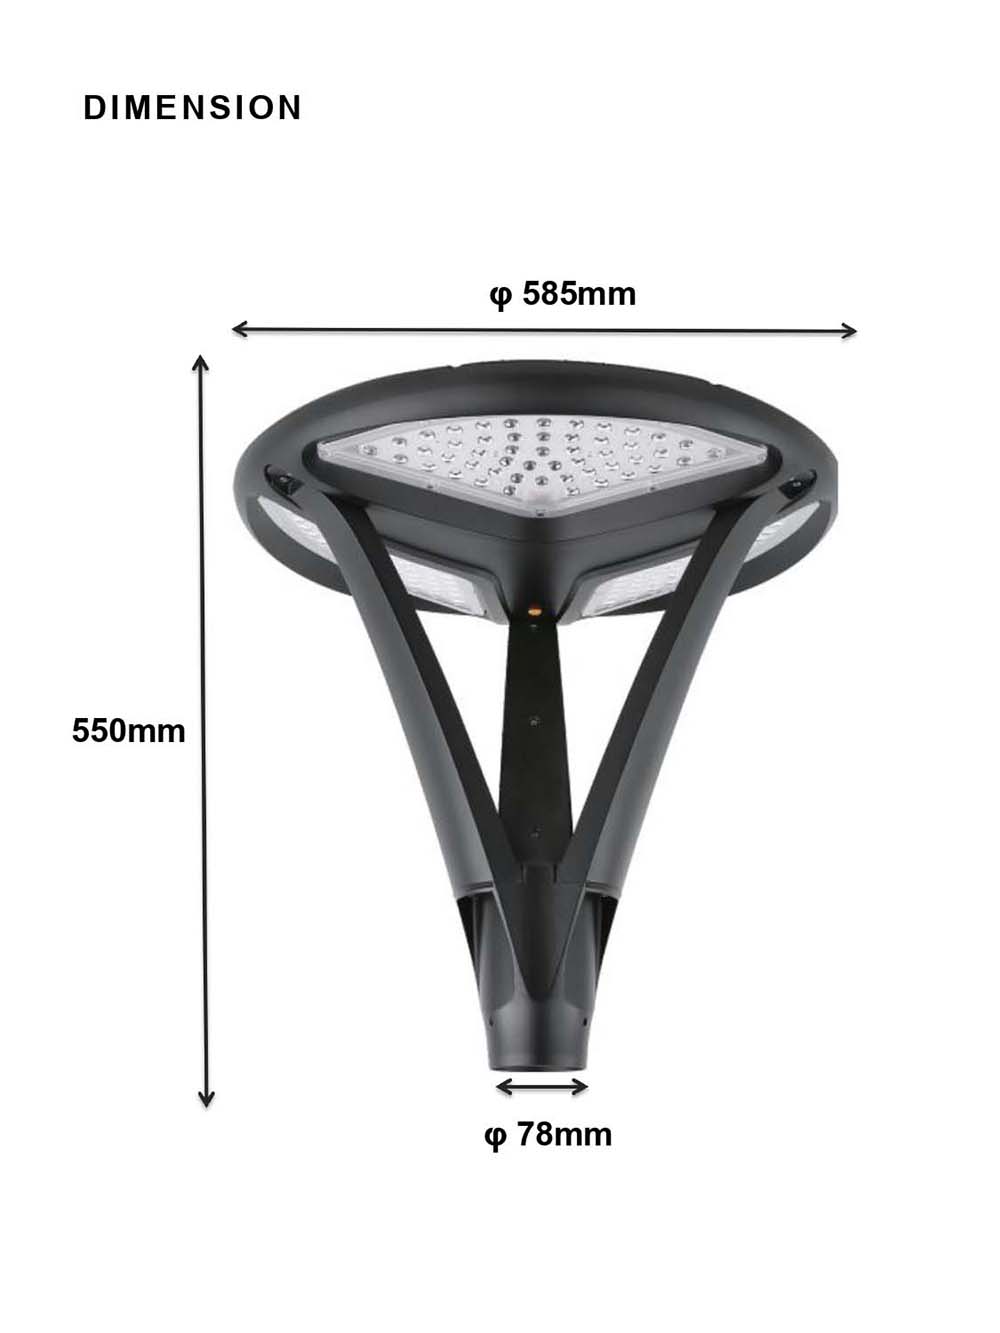 SPEC of solar yard light SCL-004R_page-04